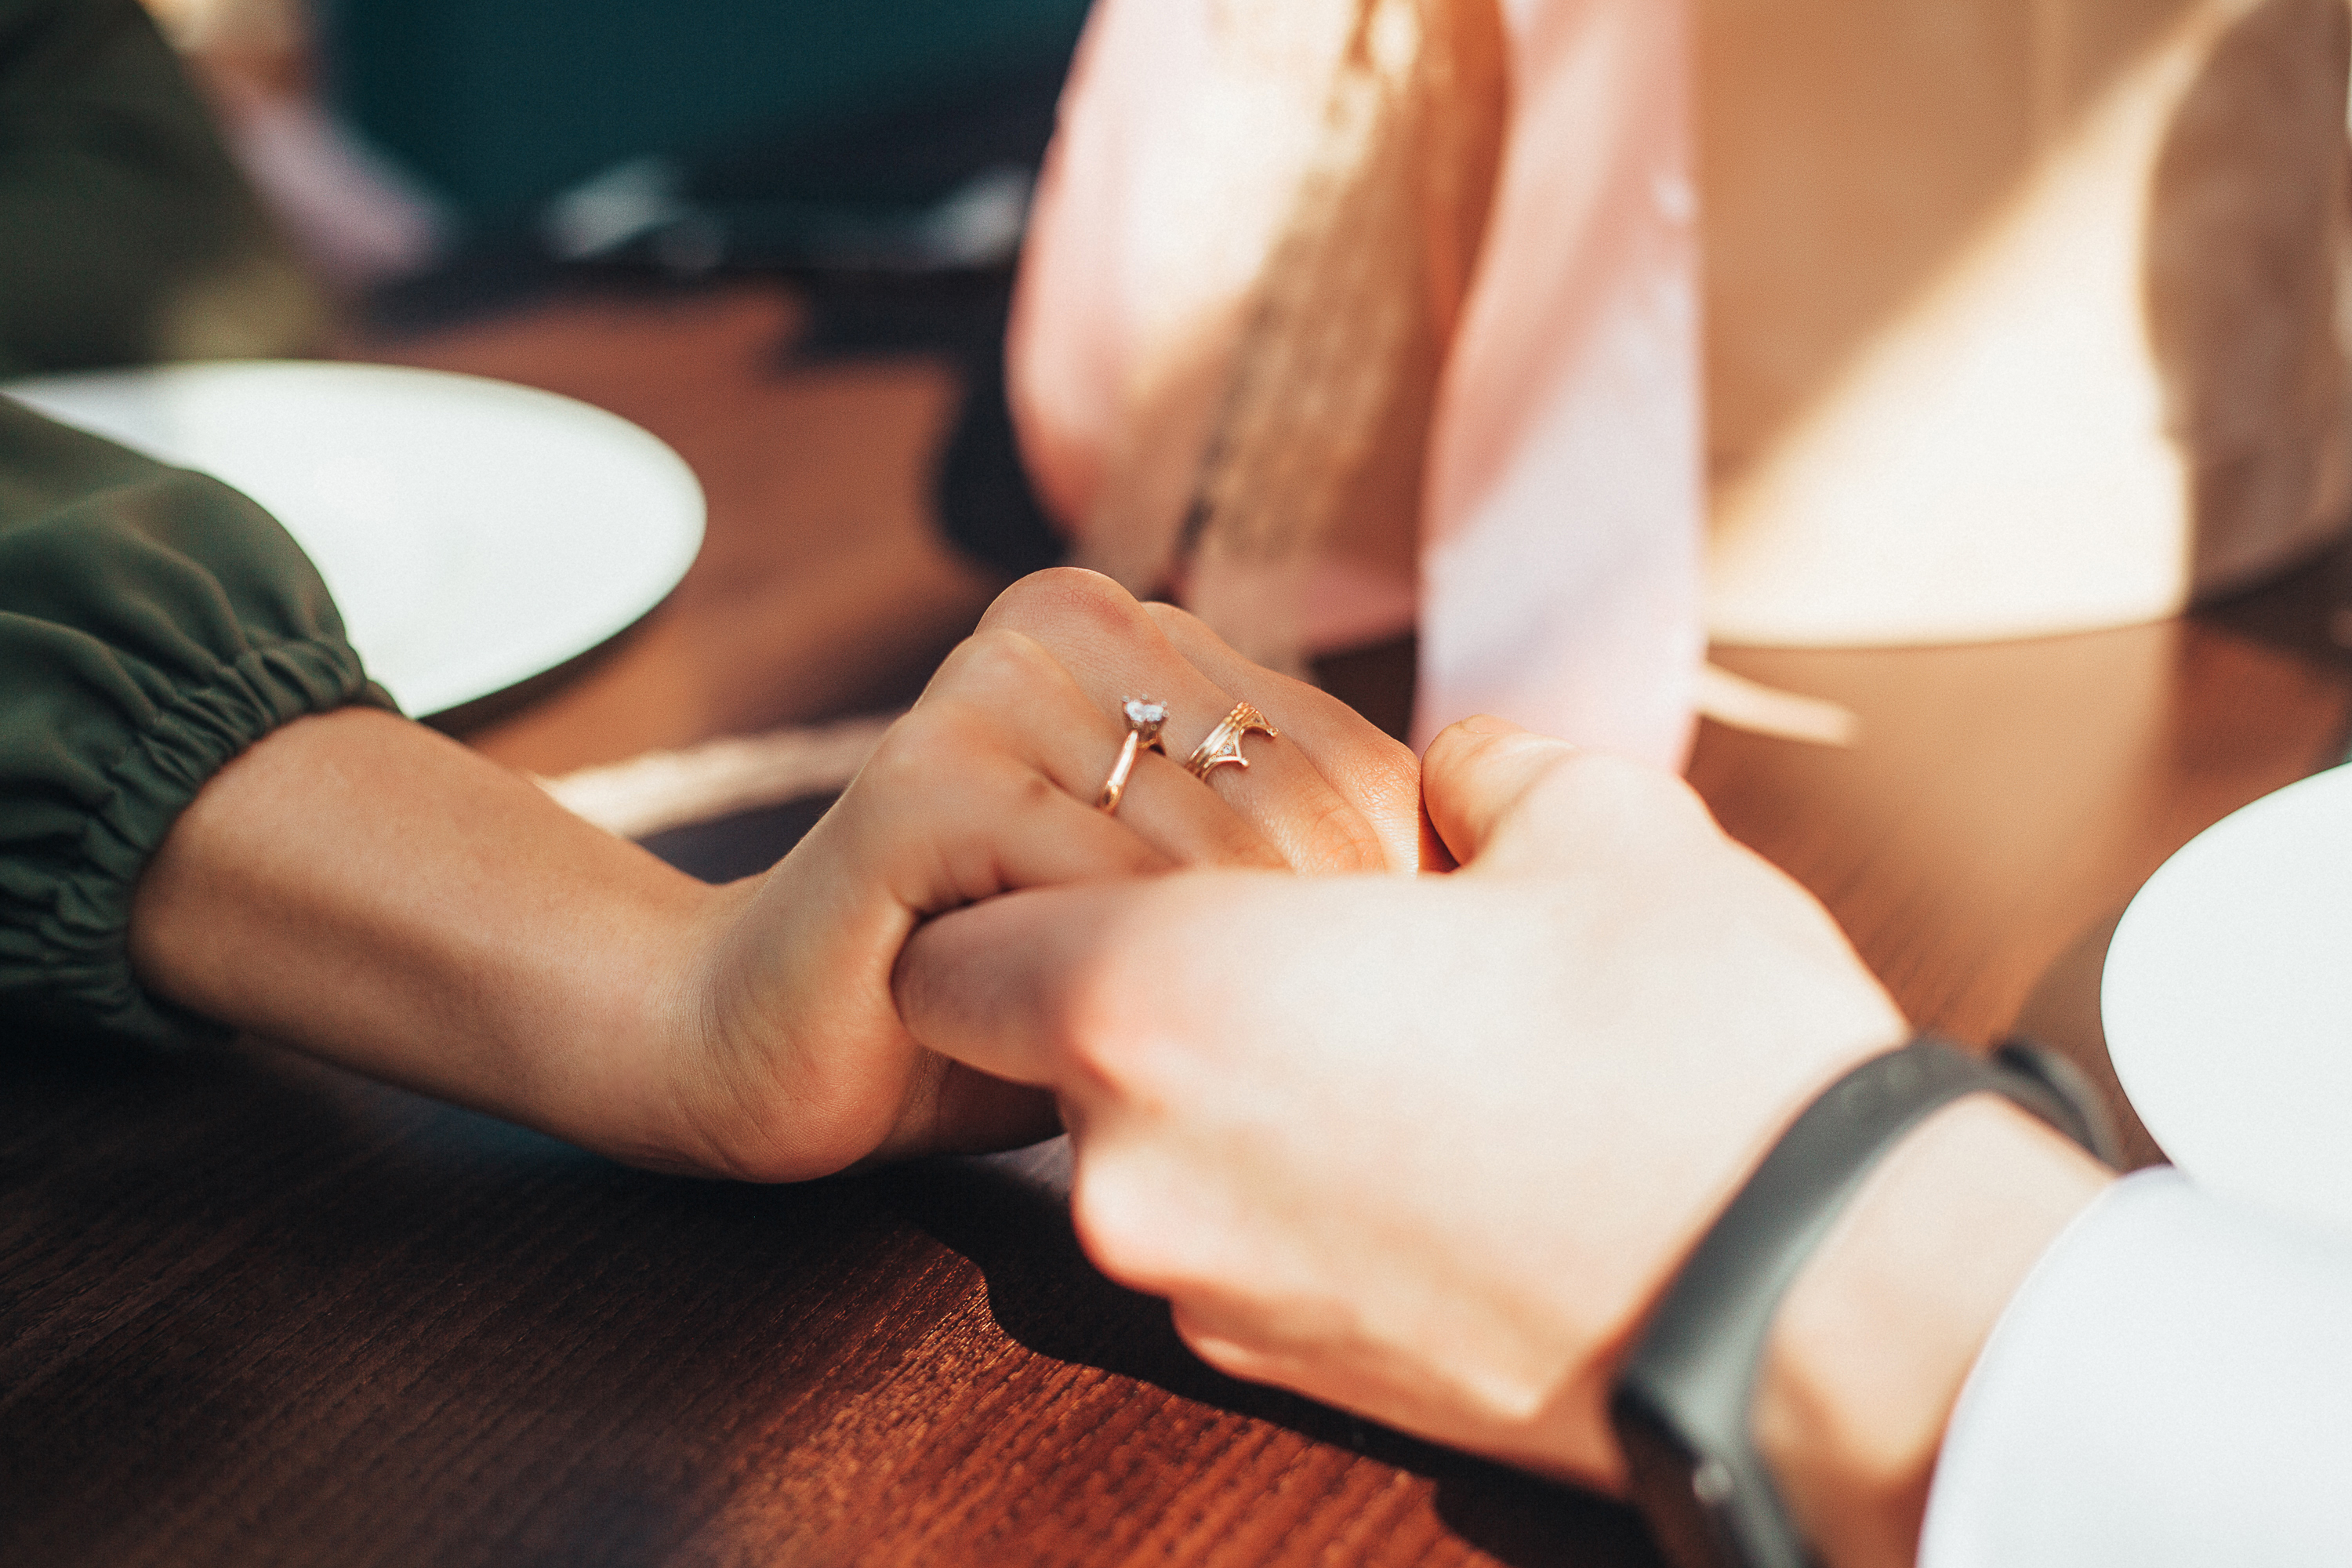 A couple holding hands across a table | Source: Shutterstock